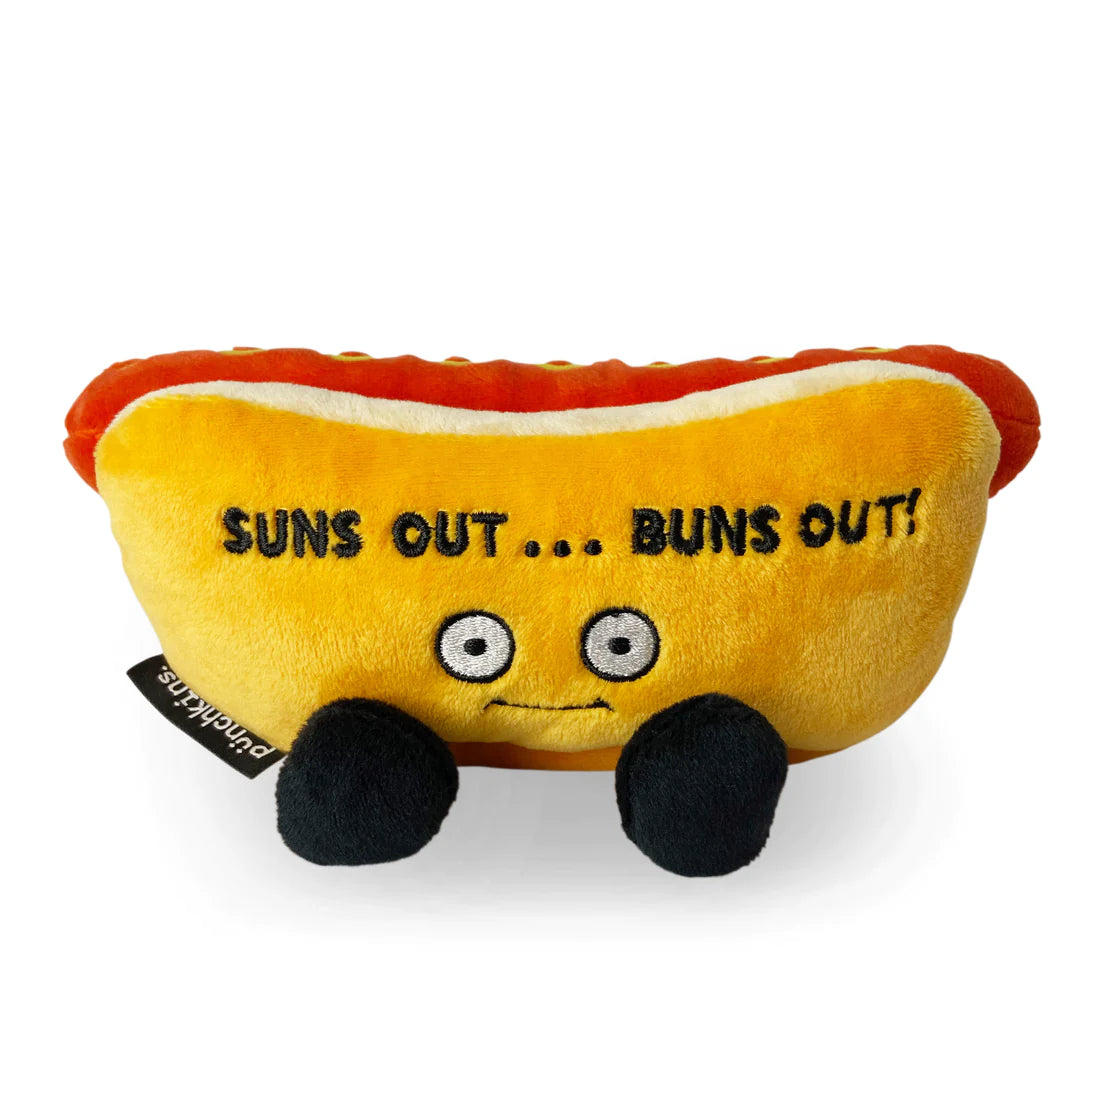 Punchkins - "Suns Out... Buns Out!" Plush Hot Dog Punchkins Punchkins    | Red Claw Gaming